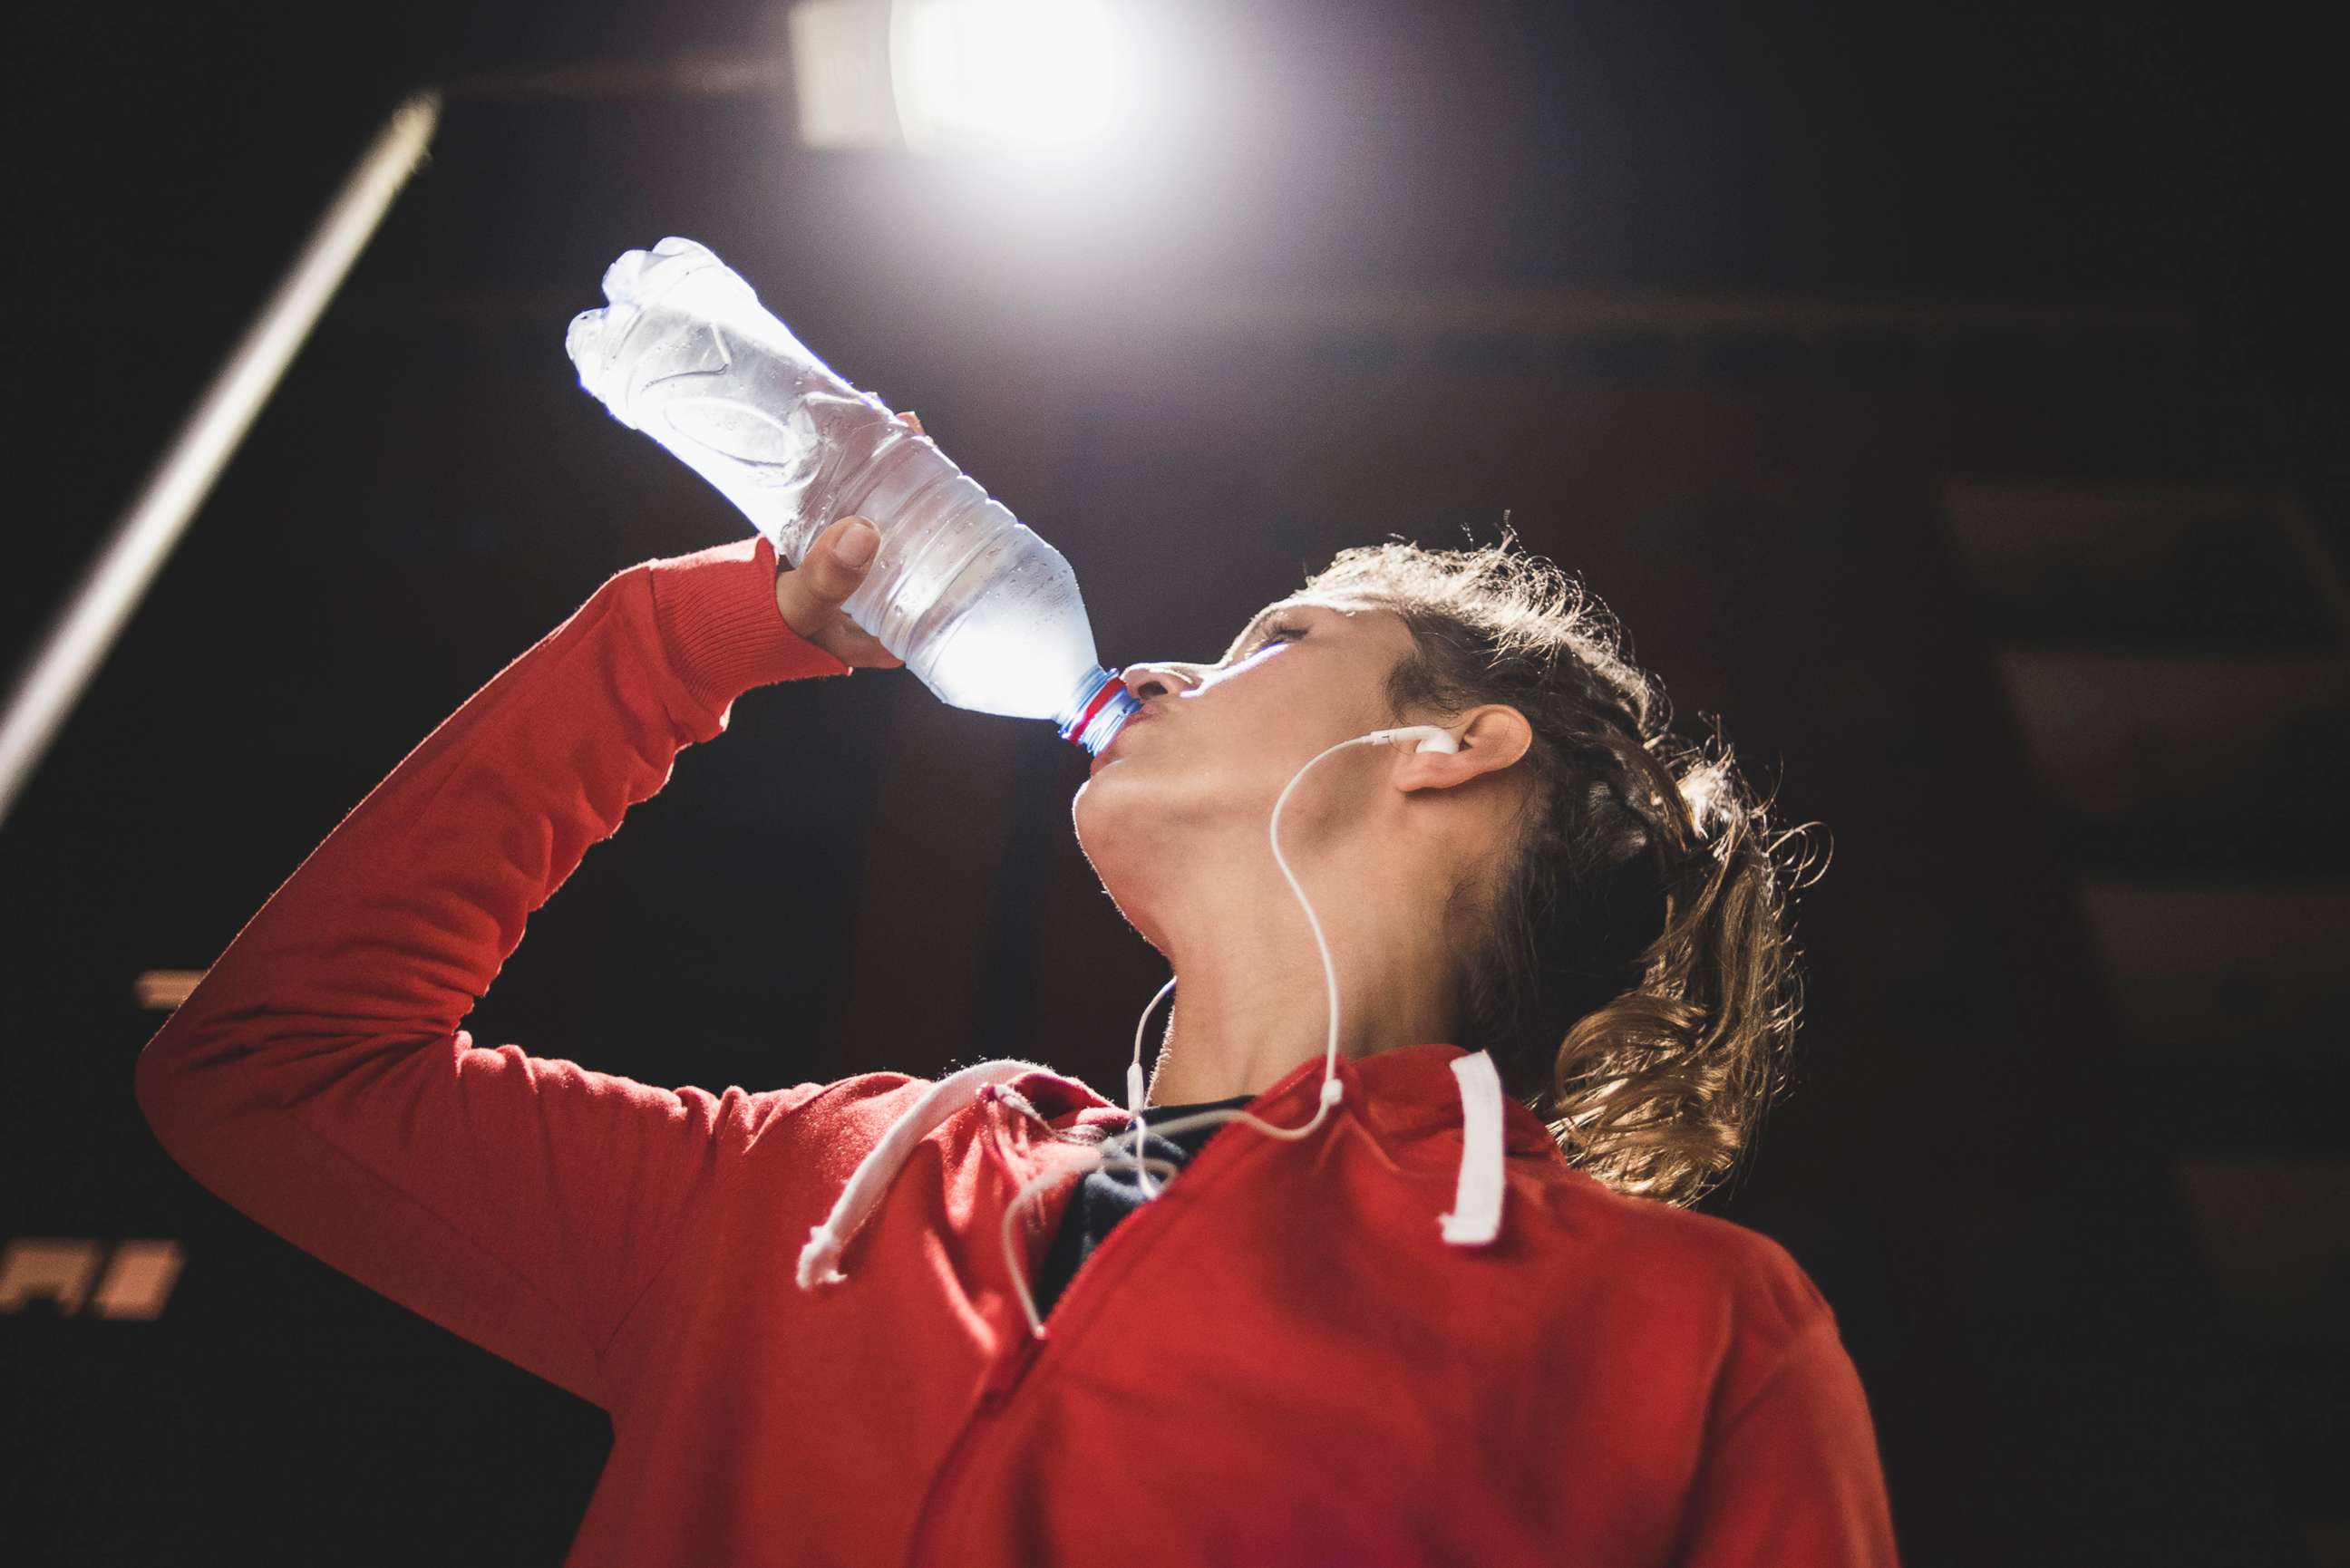 PHOTO: In this undated file photo, a woman drinks bottle water after a workout.